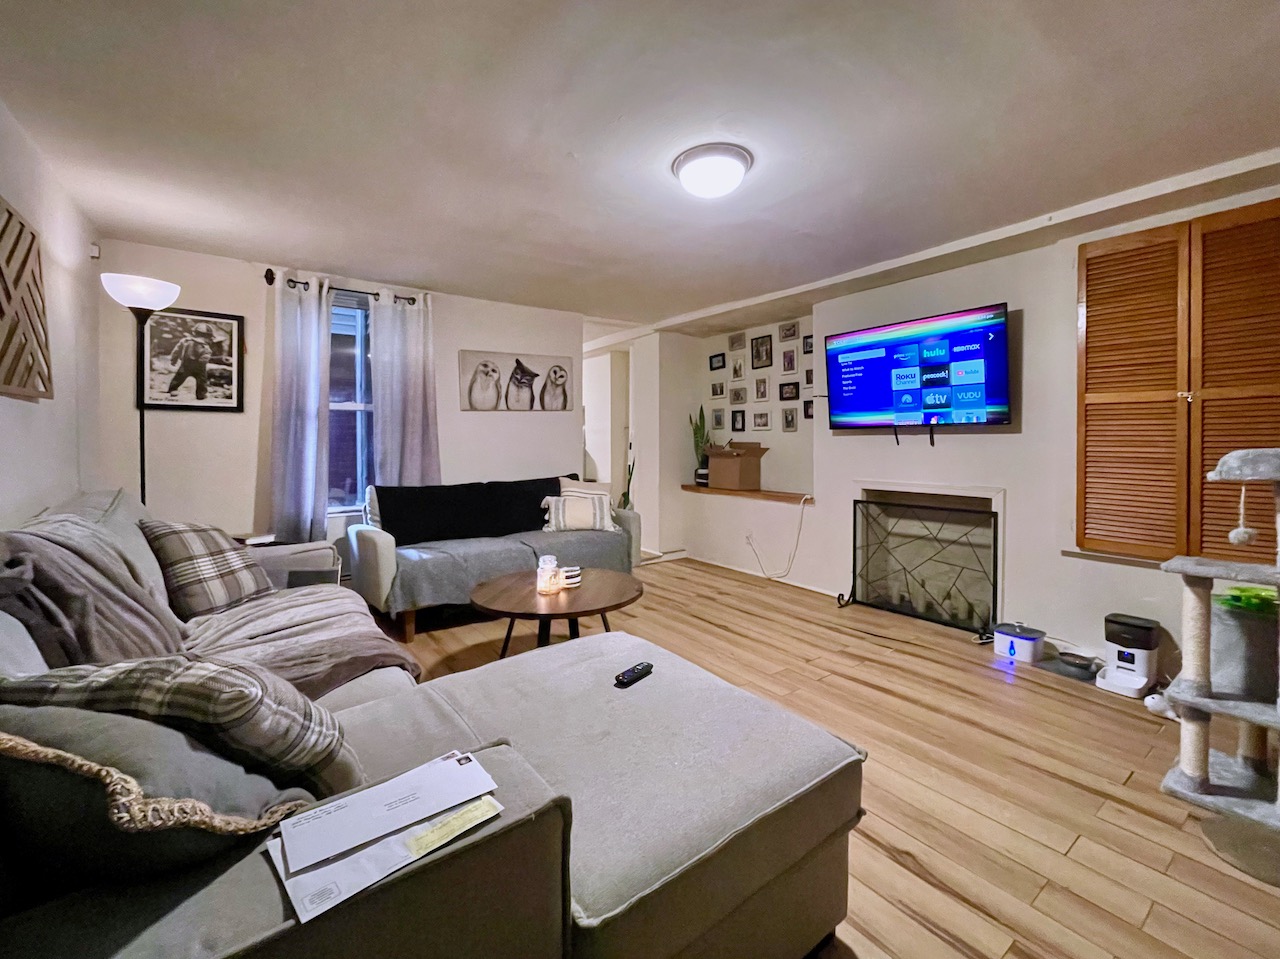 Very spacious 1 bd/ 1 ba in an AMAZING location near bus and Light Rail transportation! Same block as park with beautiful NYC views! Access to backyard! 